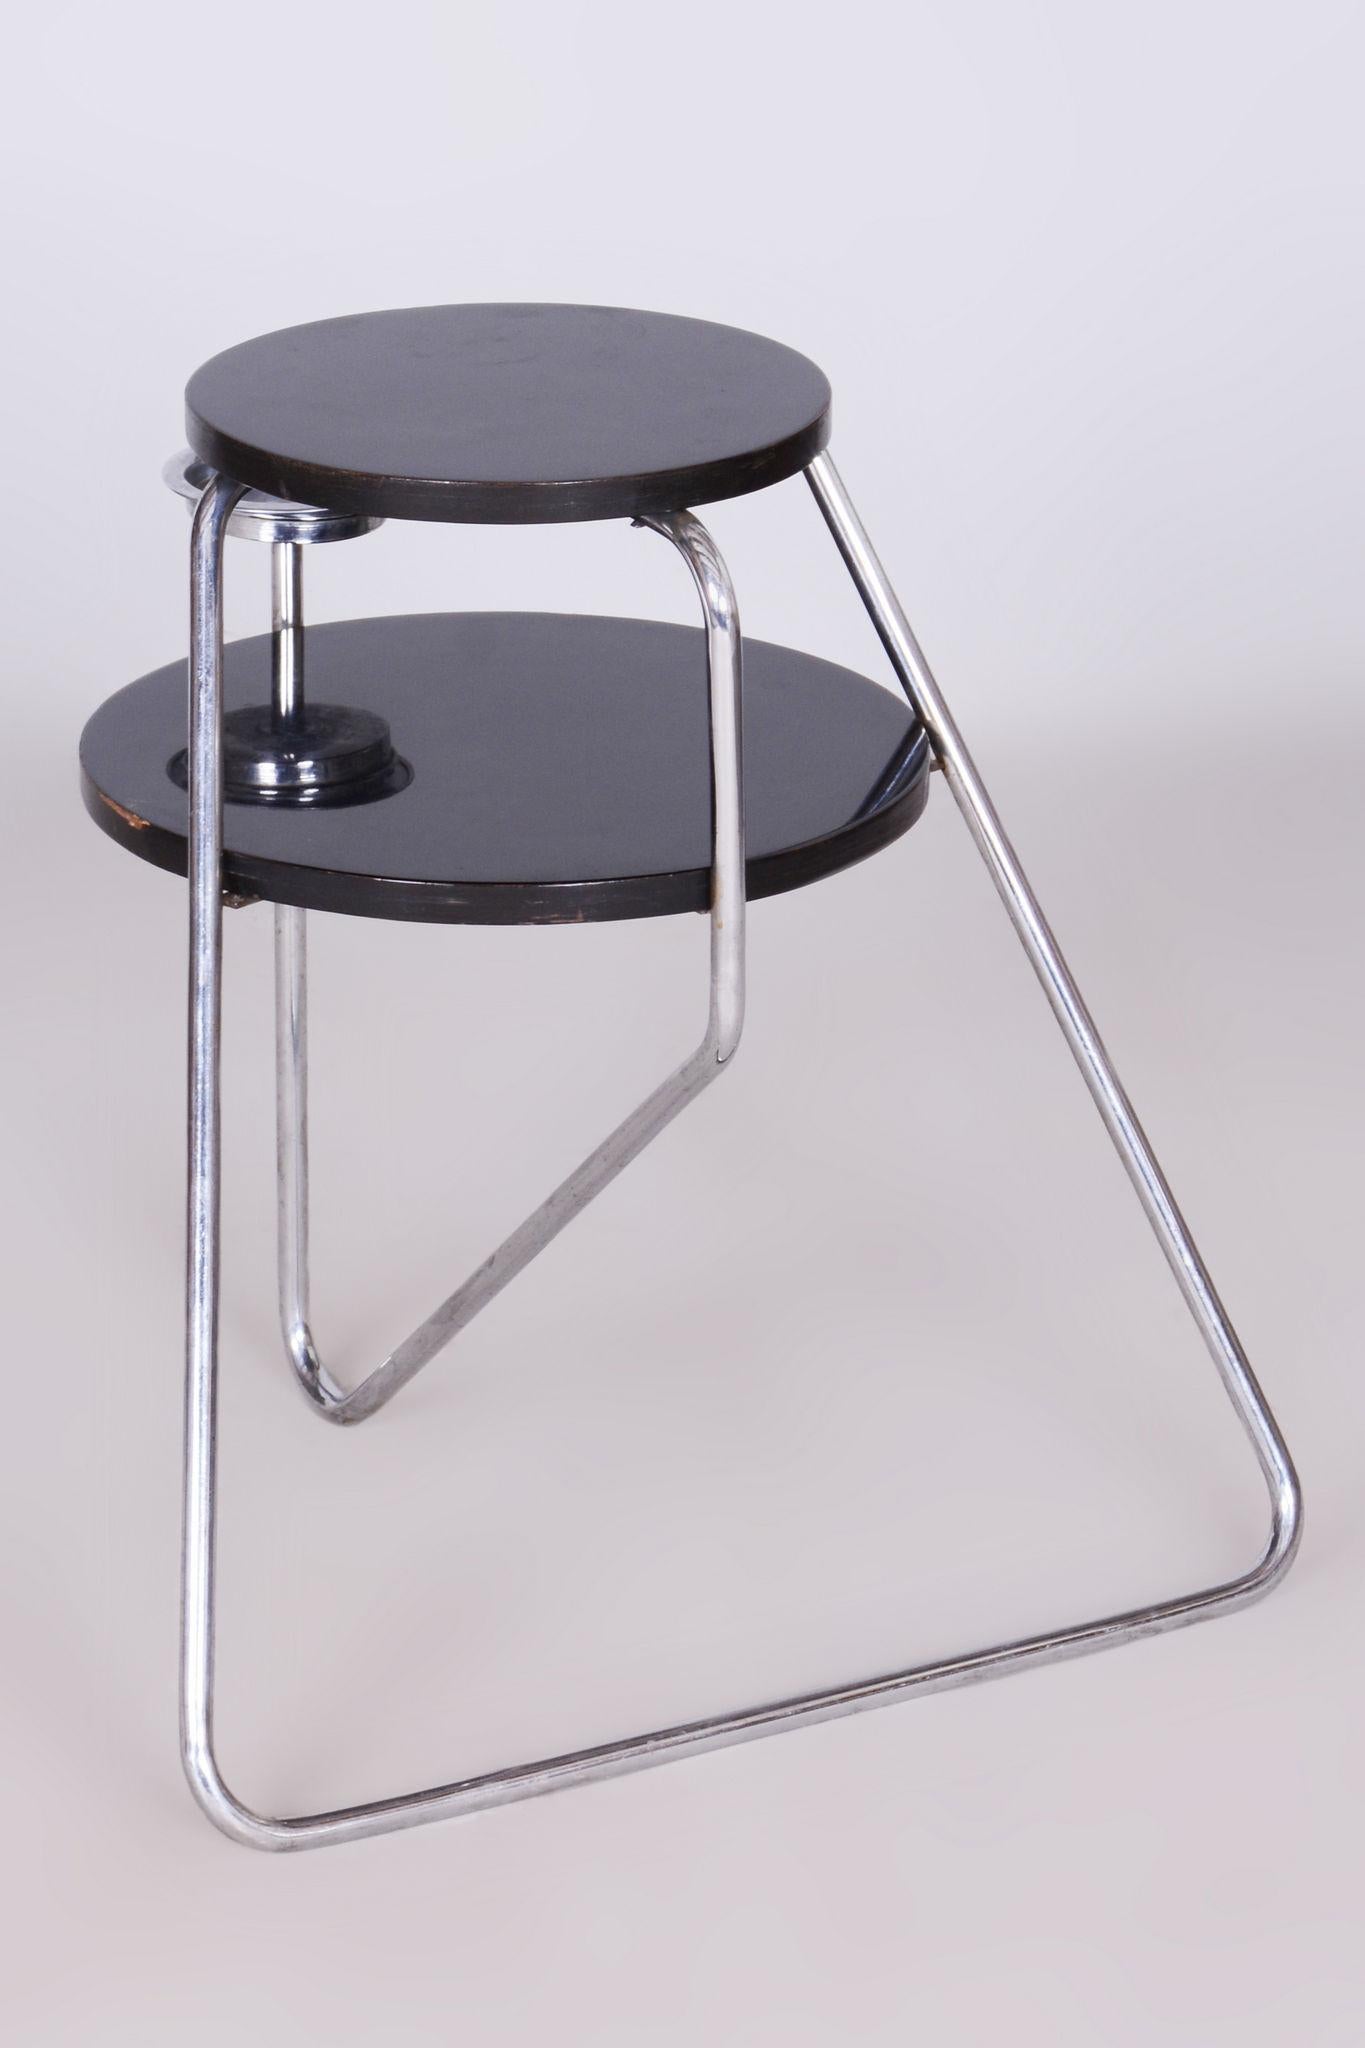 Mid-20th Century Restored Bauhaus Small Table, Chrome, Revived Polish, Czechia, 1930s For Sale